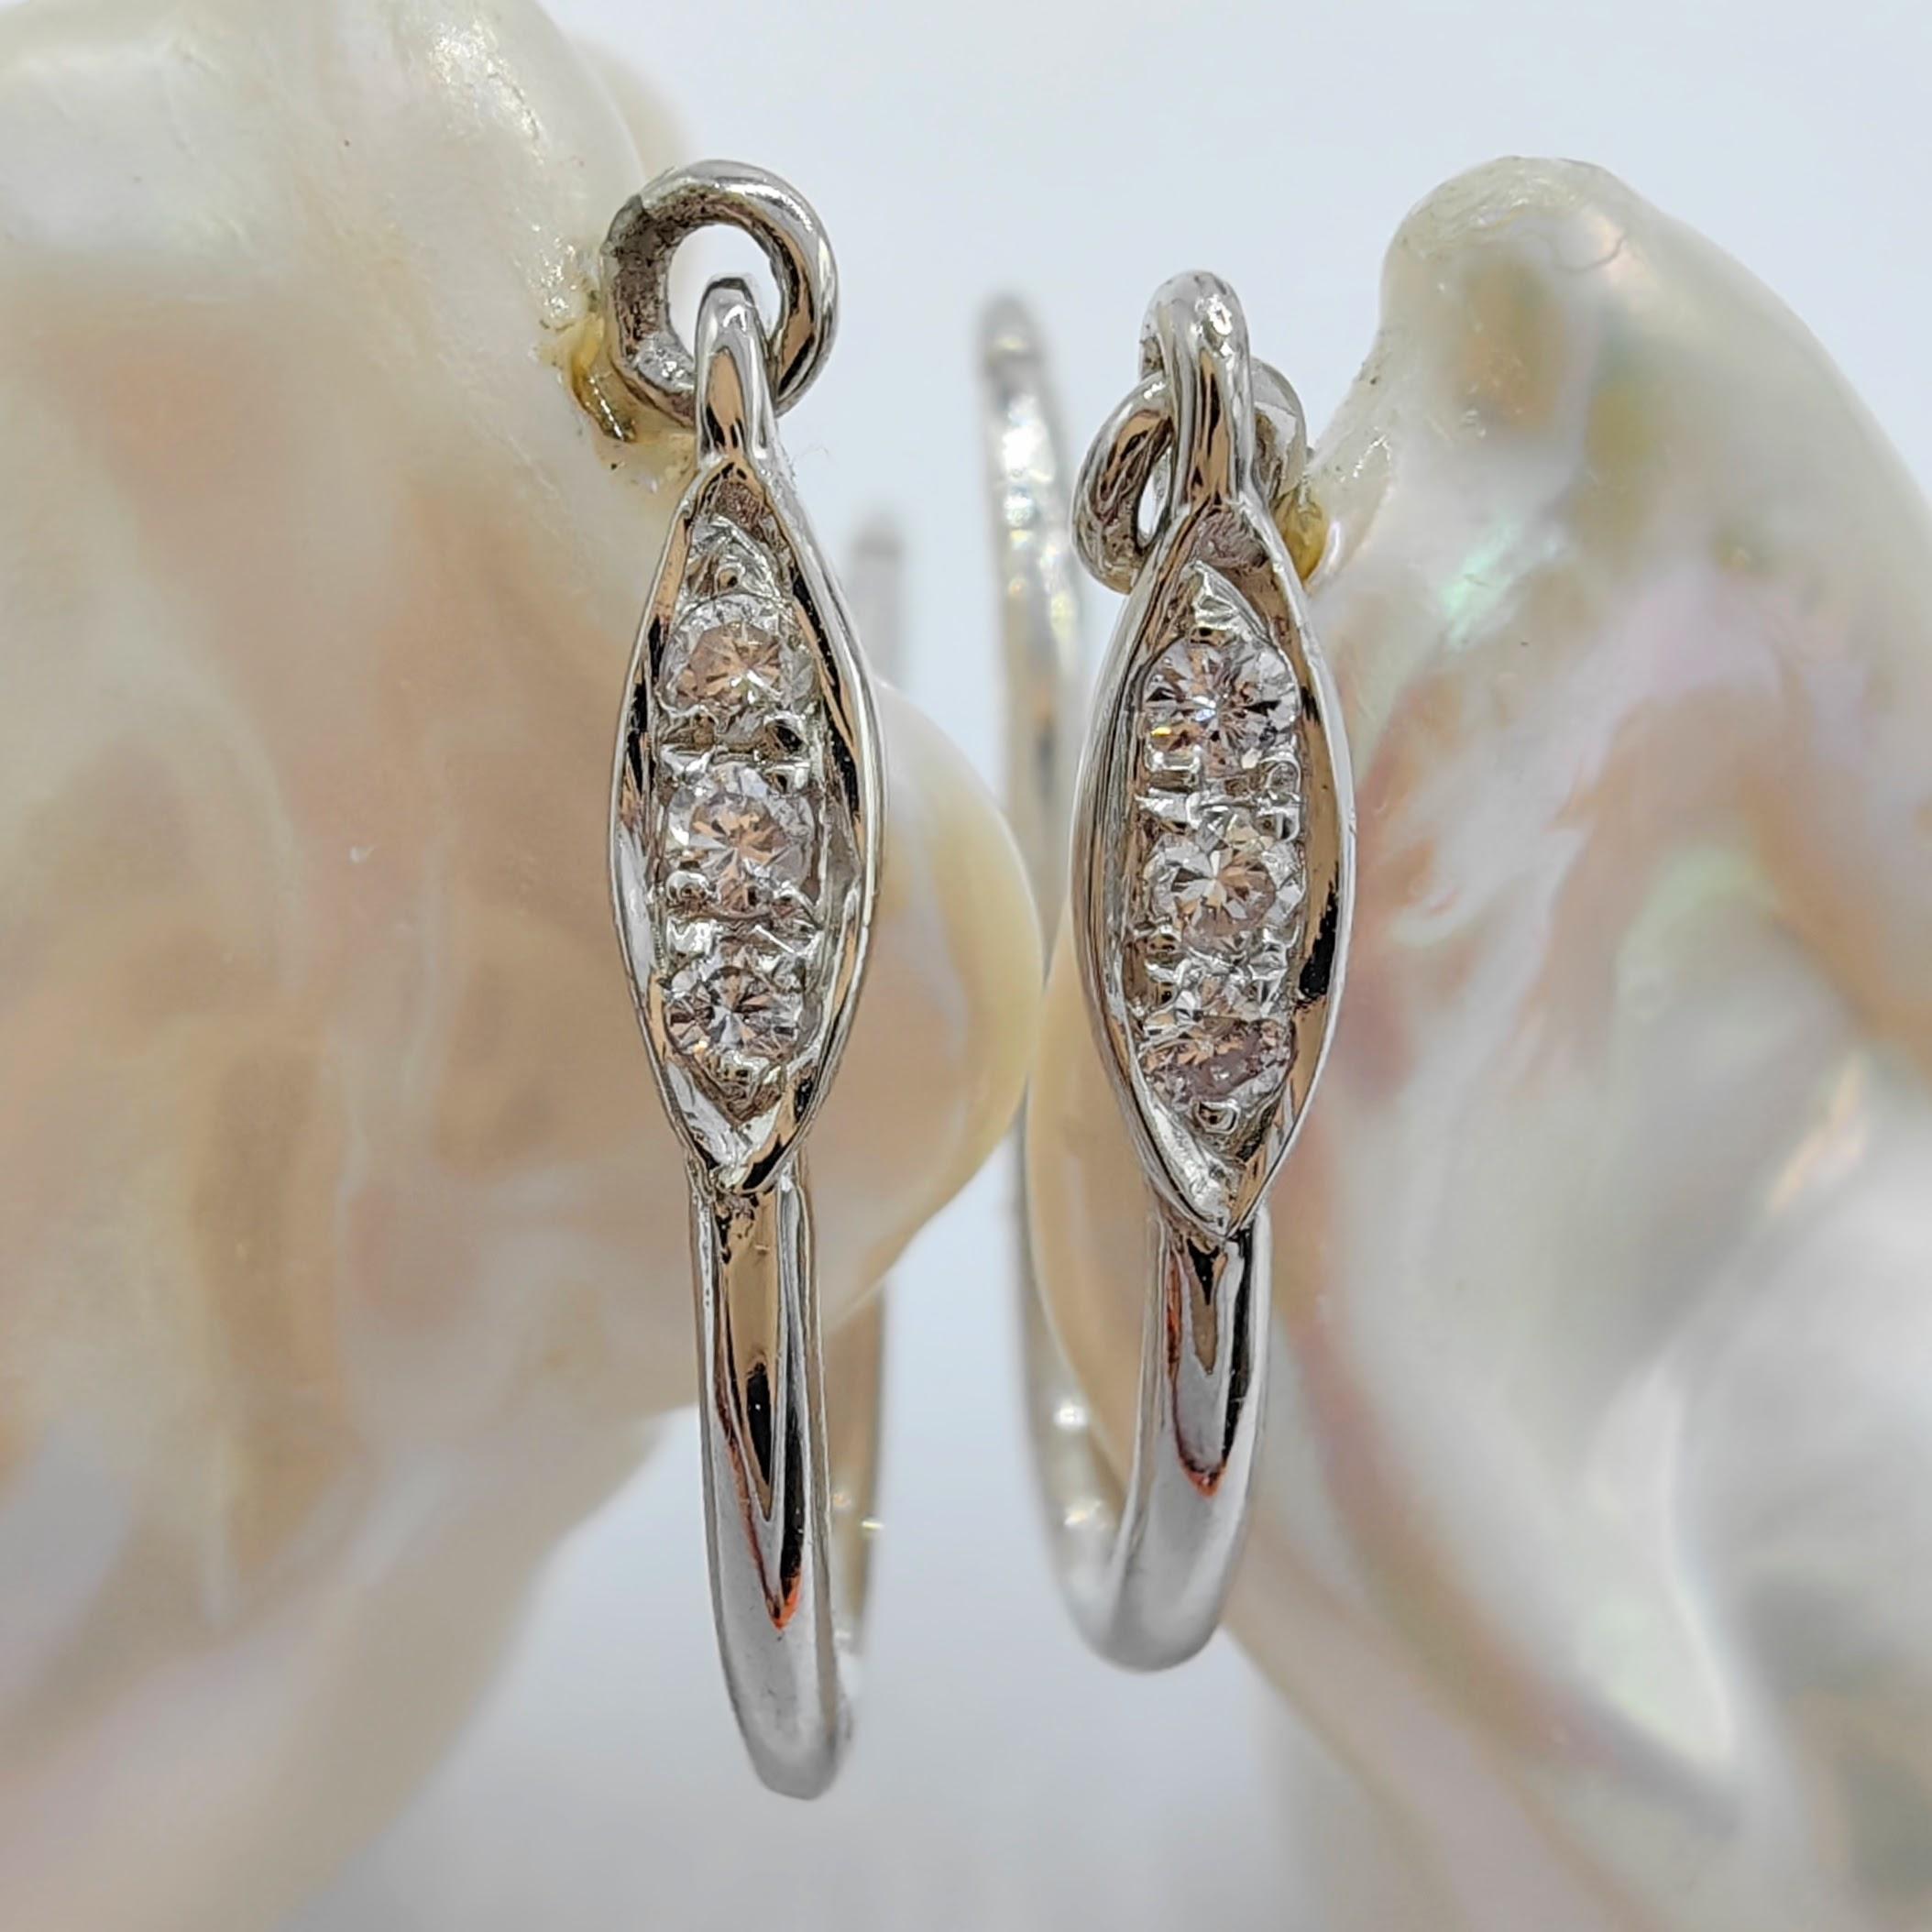 Baroque Pearl Diamond Dangling Drop Earrings With 18K White Gold French Hooks 1